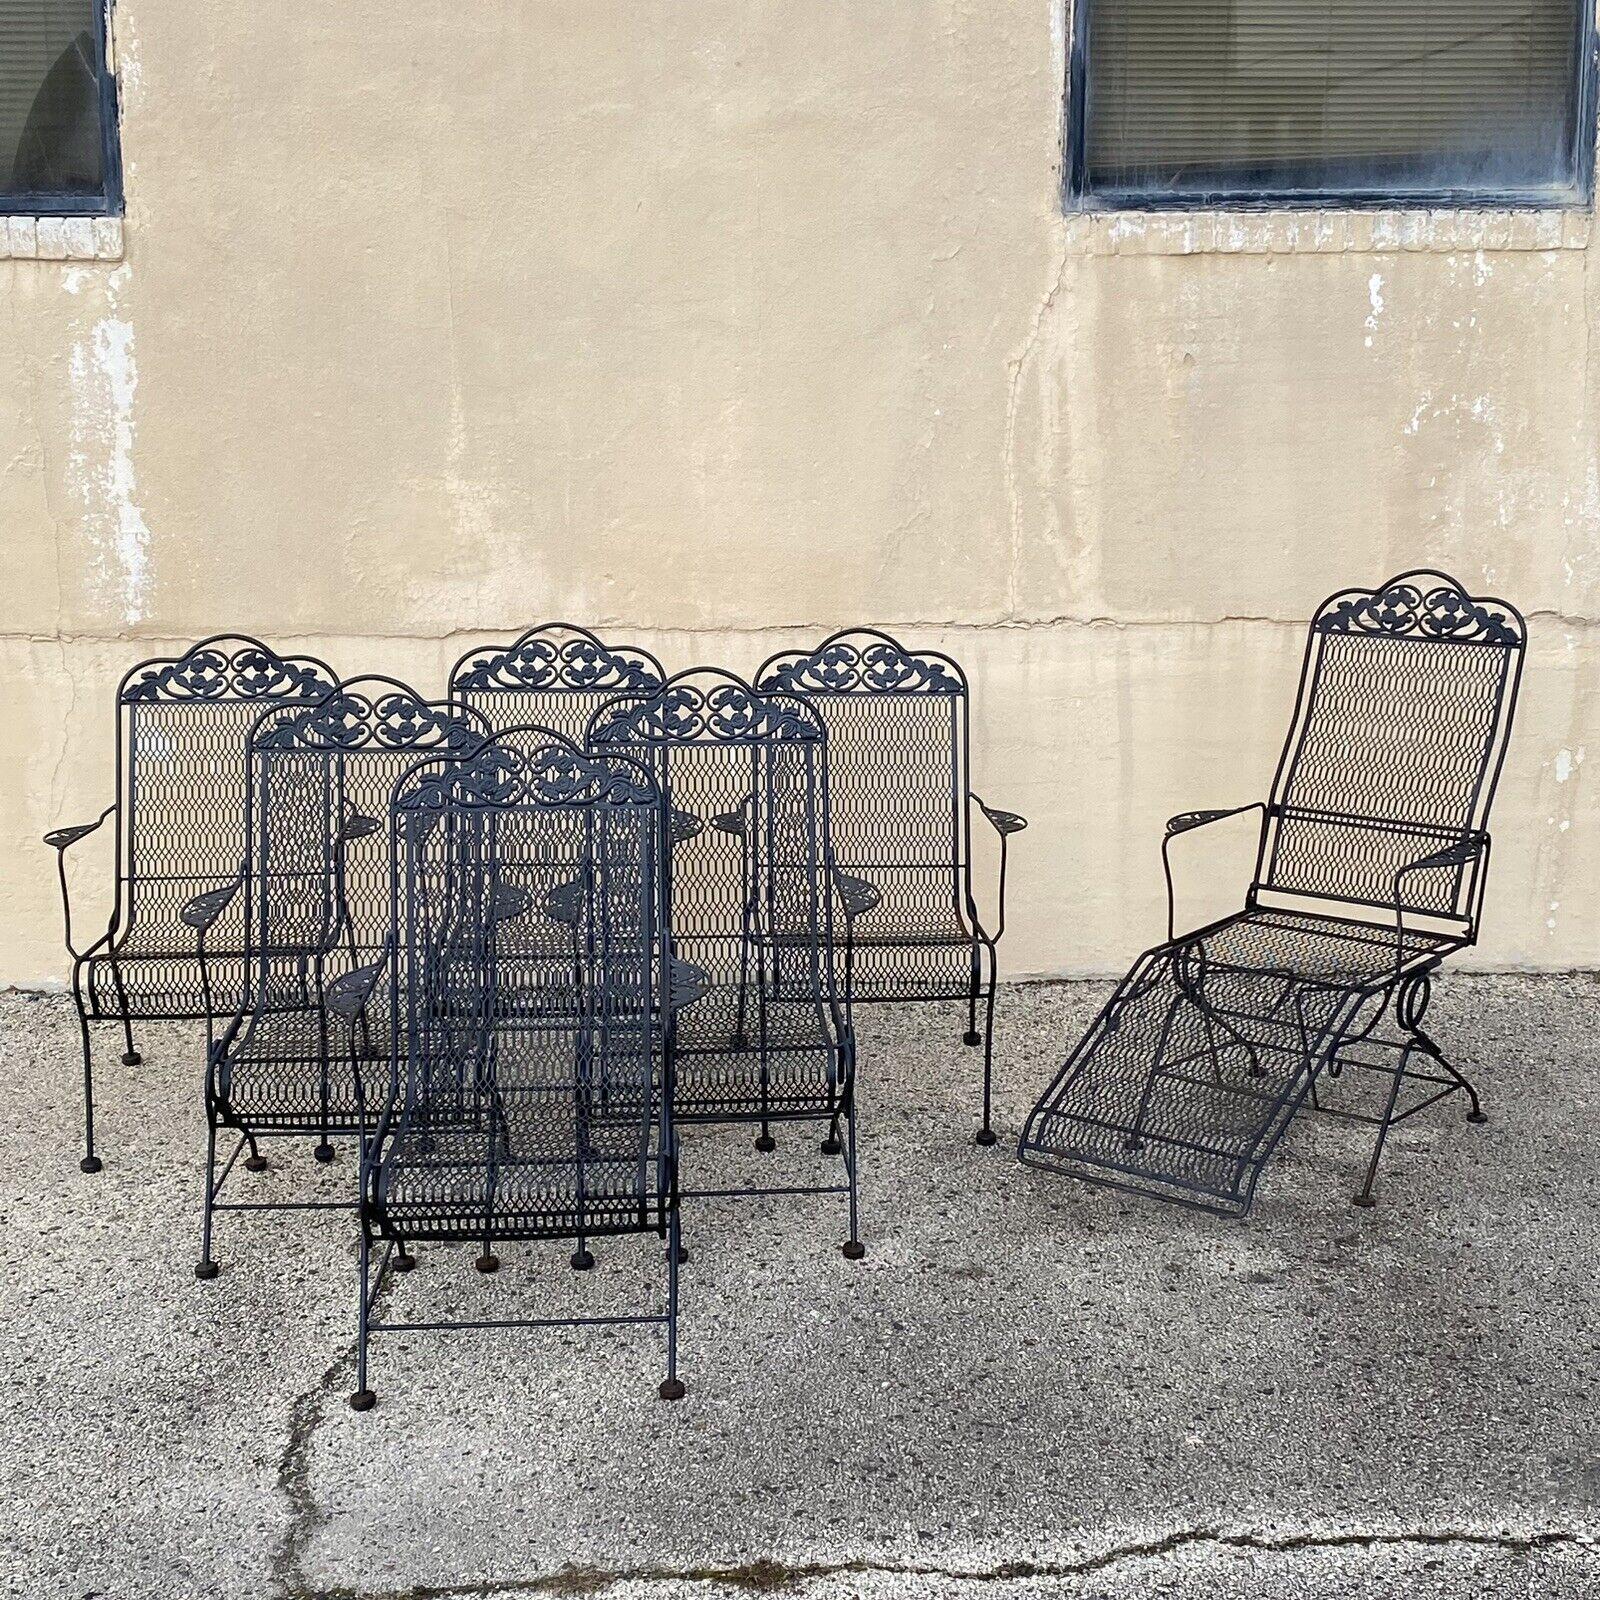 Vintage Wrought Iron Rose and Vine Pattern Garden Patio Chairs - 7 Pc Set For Sale 12